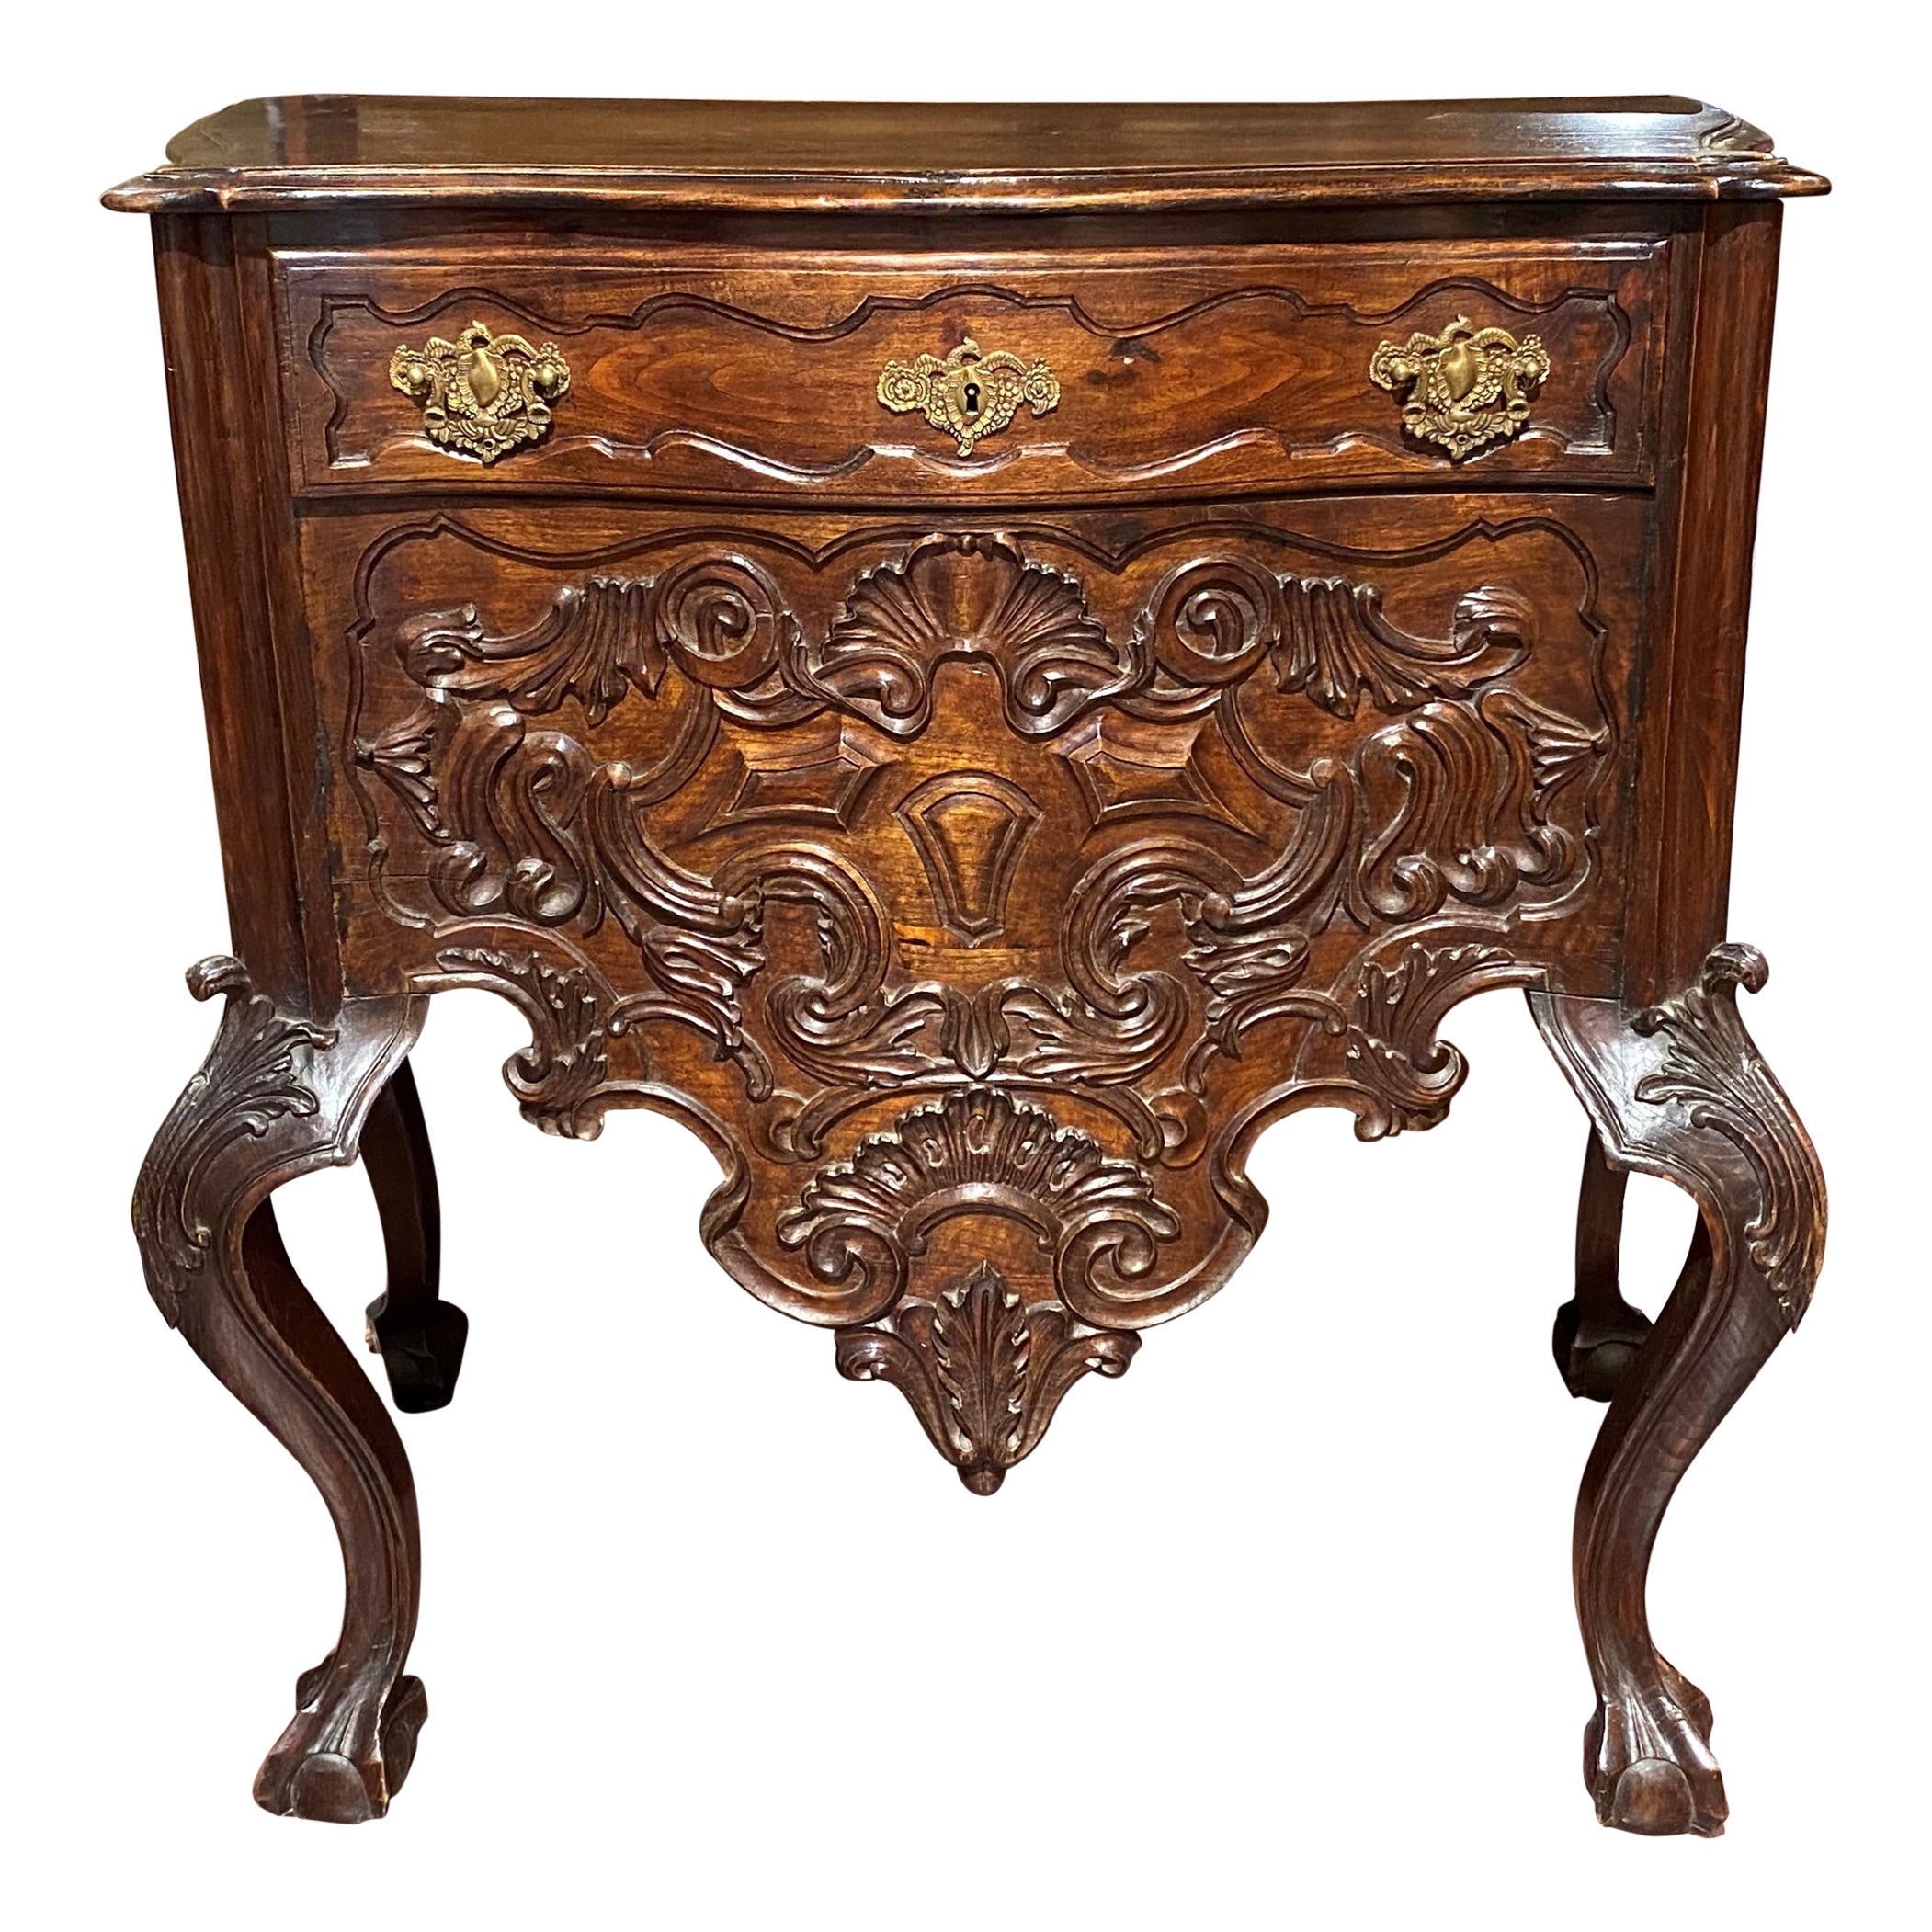 19th Century Portuguese Ornately Carved Rococo Revival Lowboy For Sale